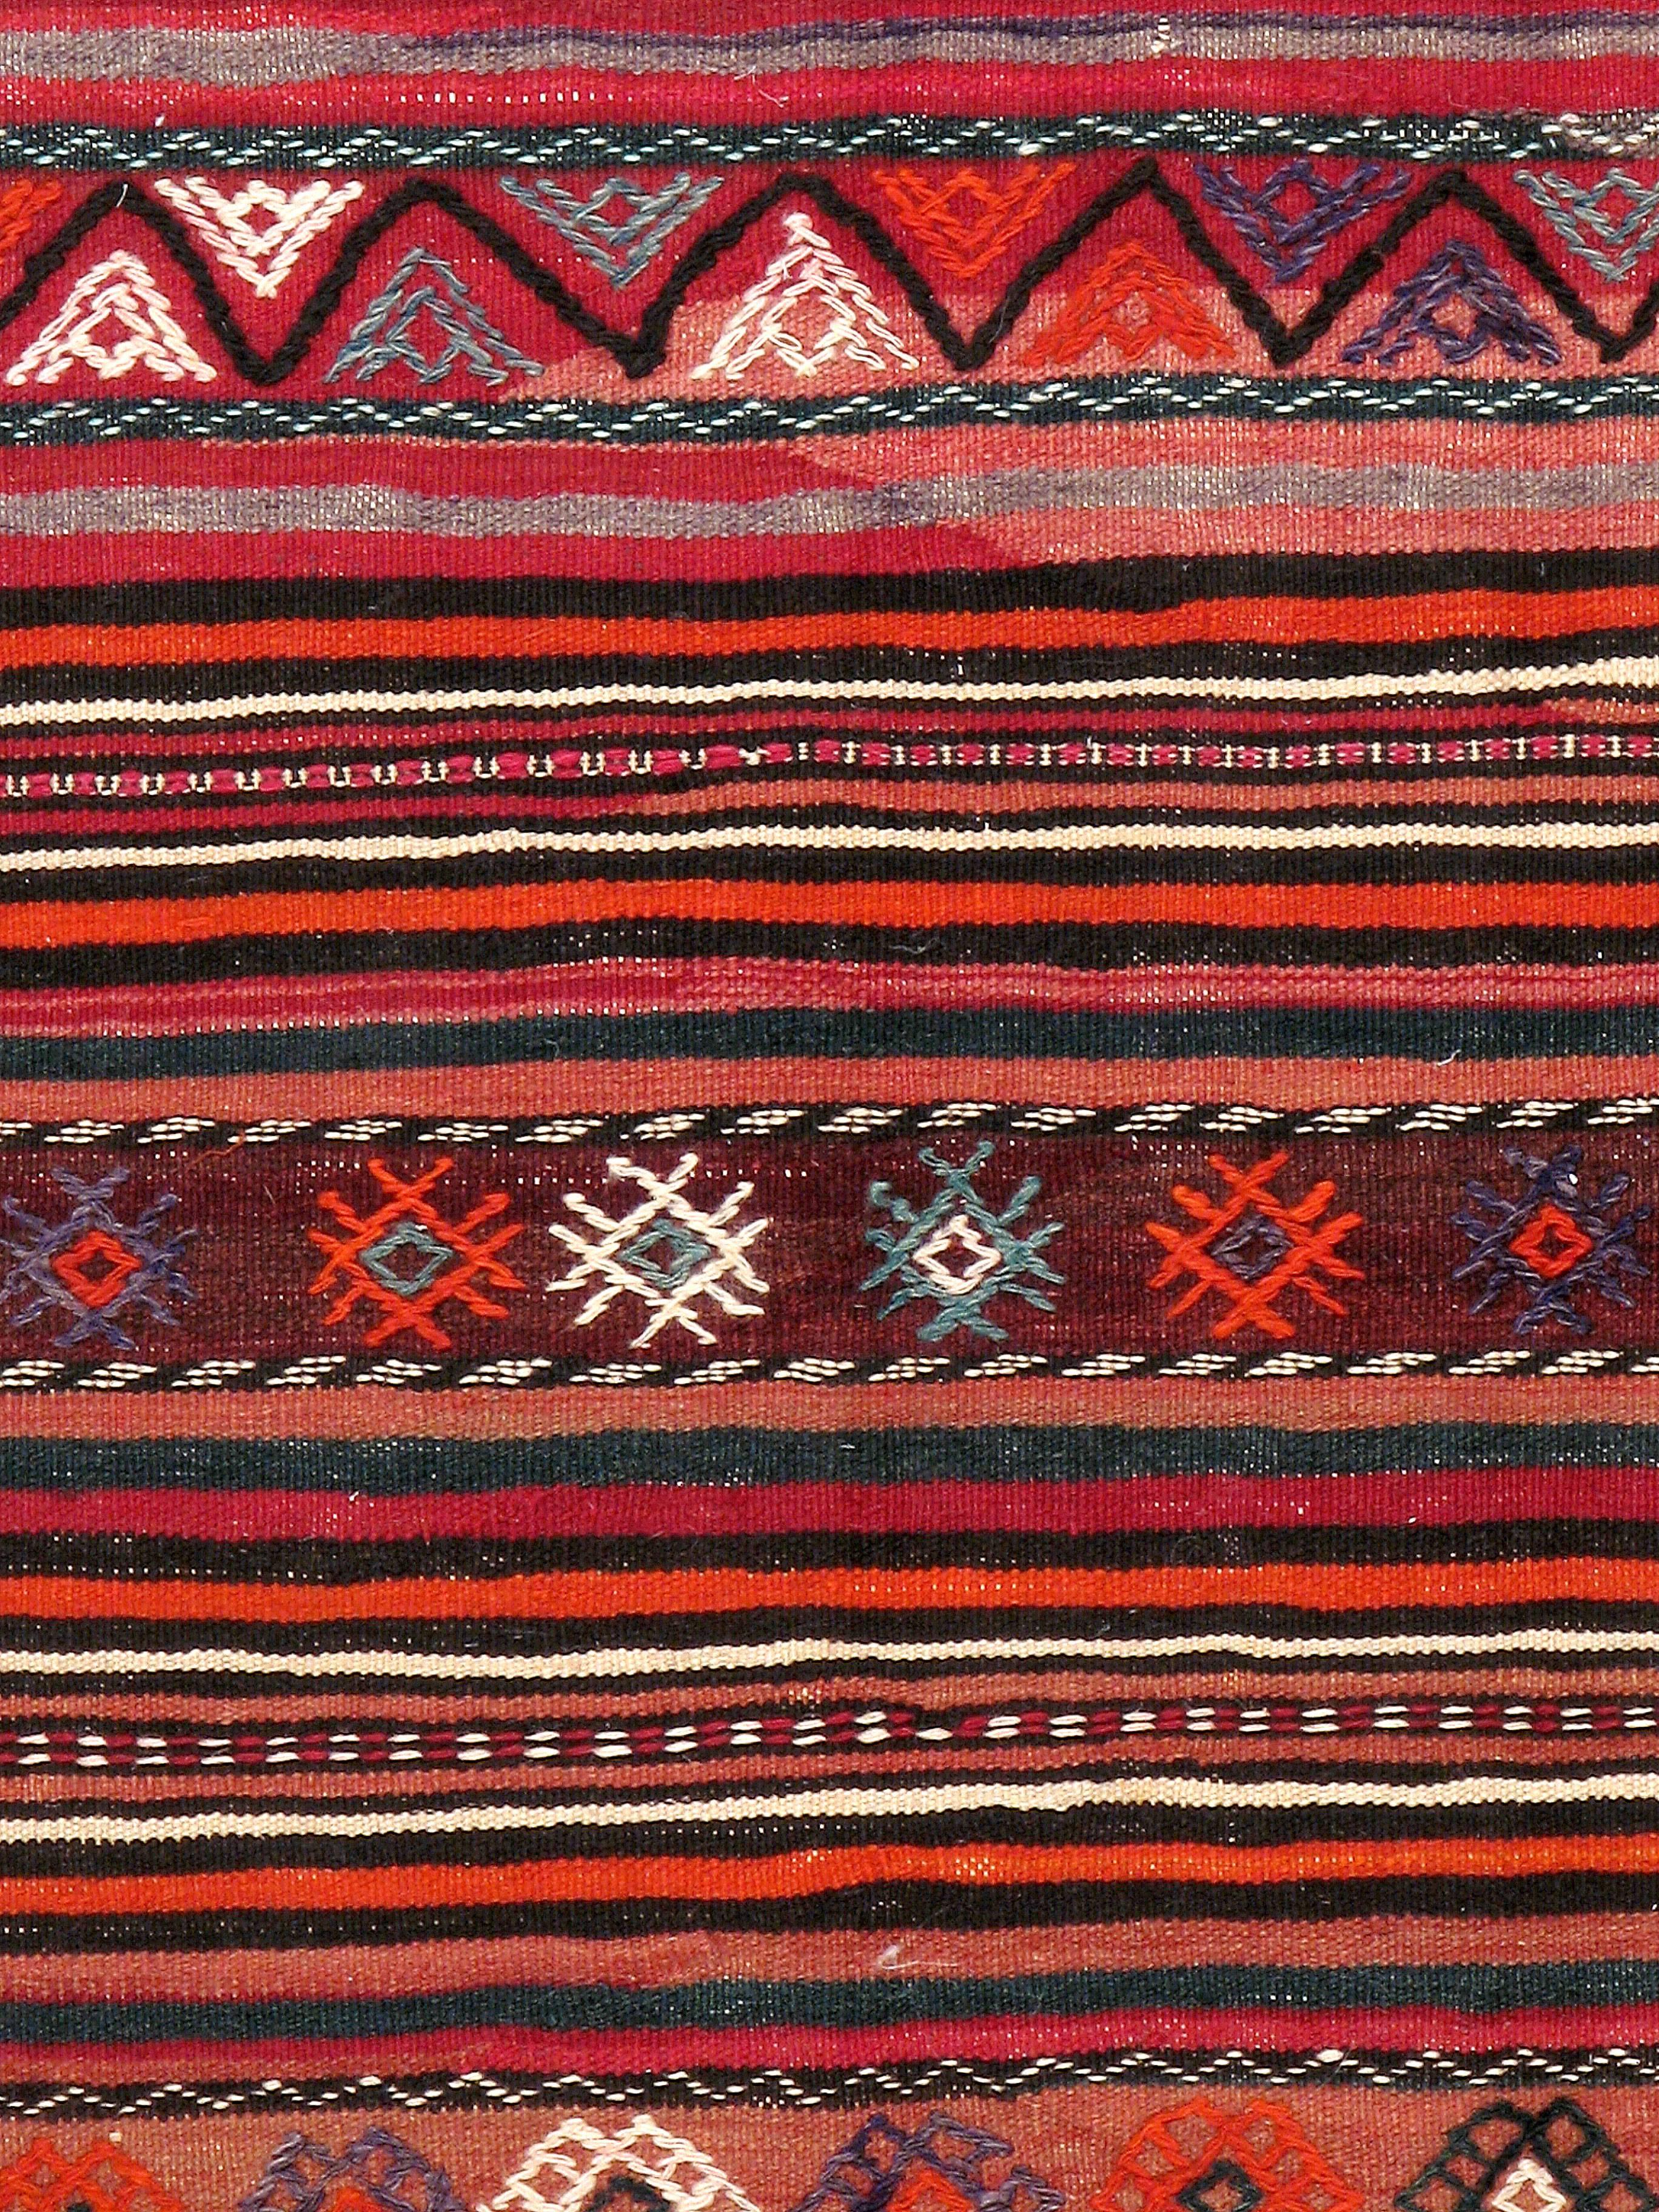 A vintage Turkish flat-woven Kilim carpet from the third quarter of the 20th century.